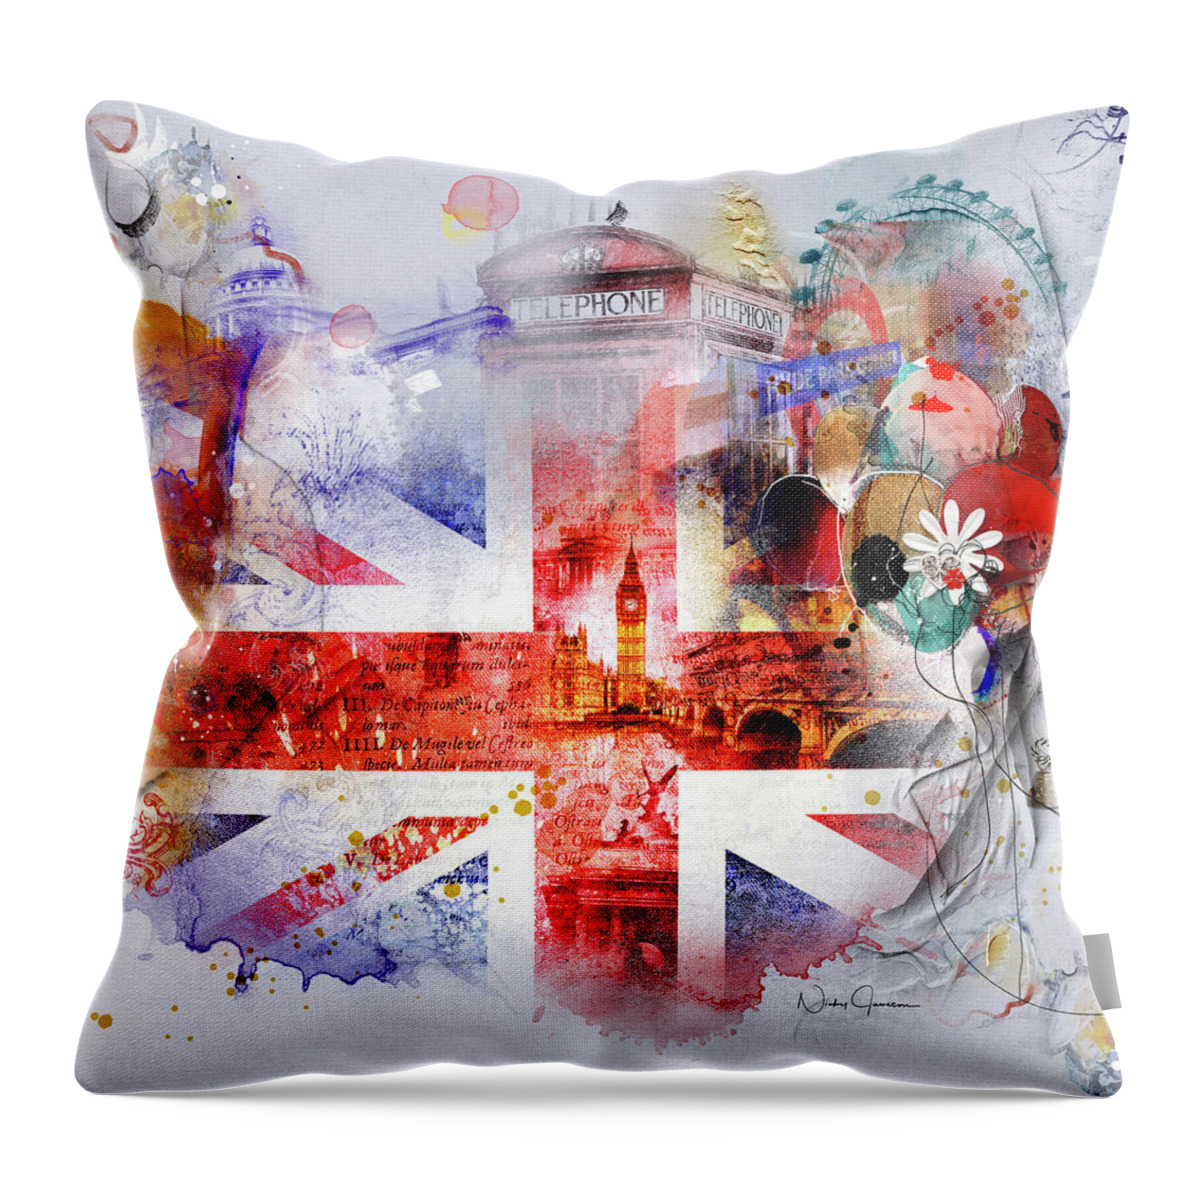 England Throw Pillow featuring the digital art Epoch by Nicky Jameson